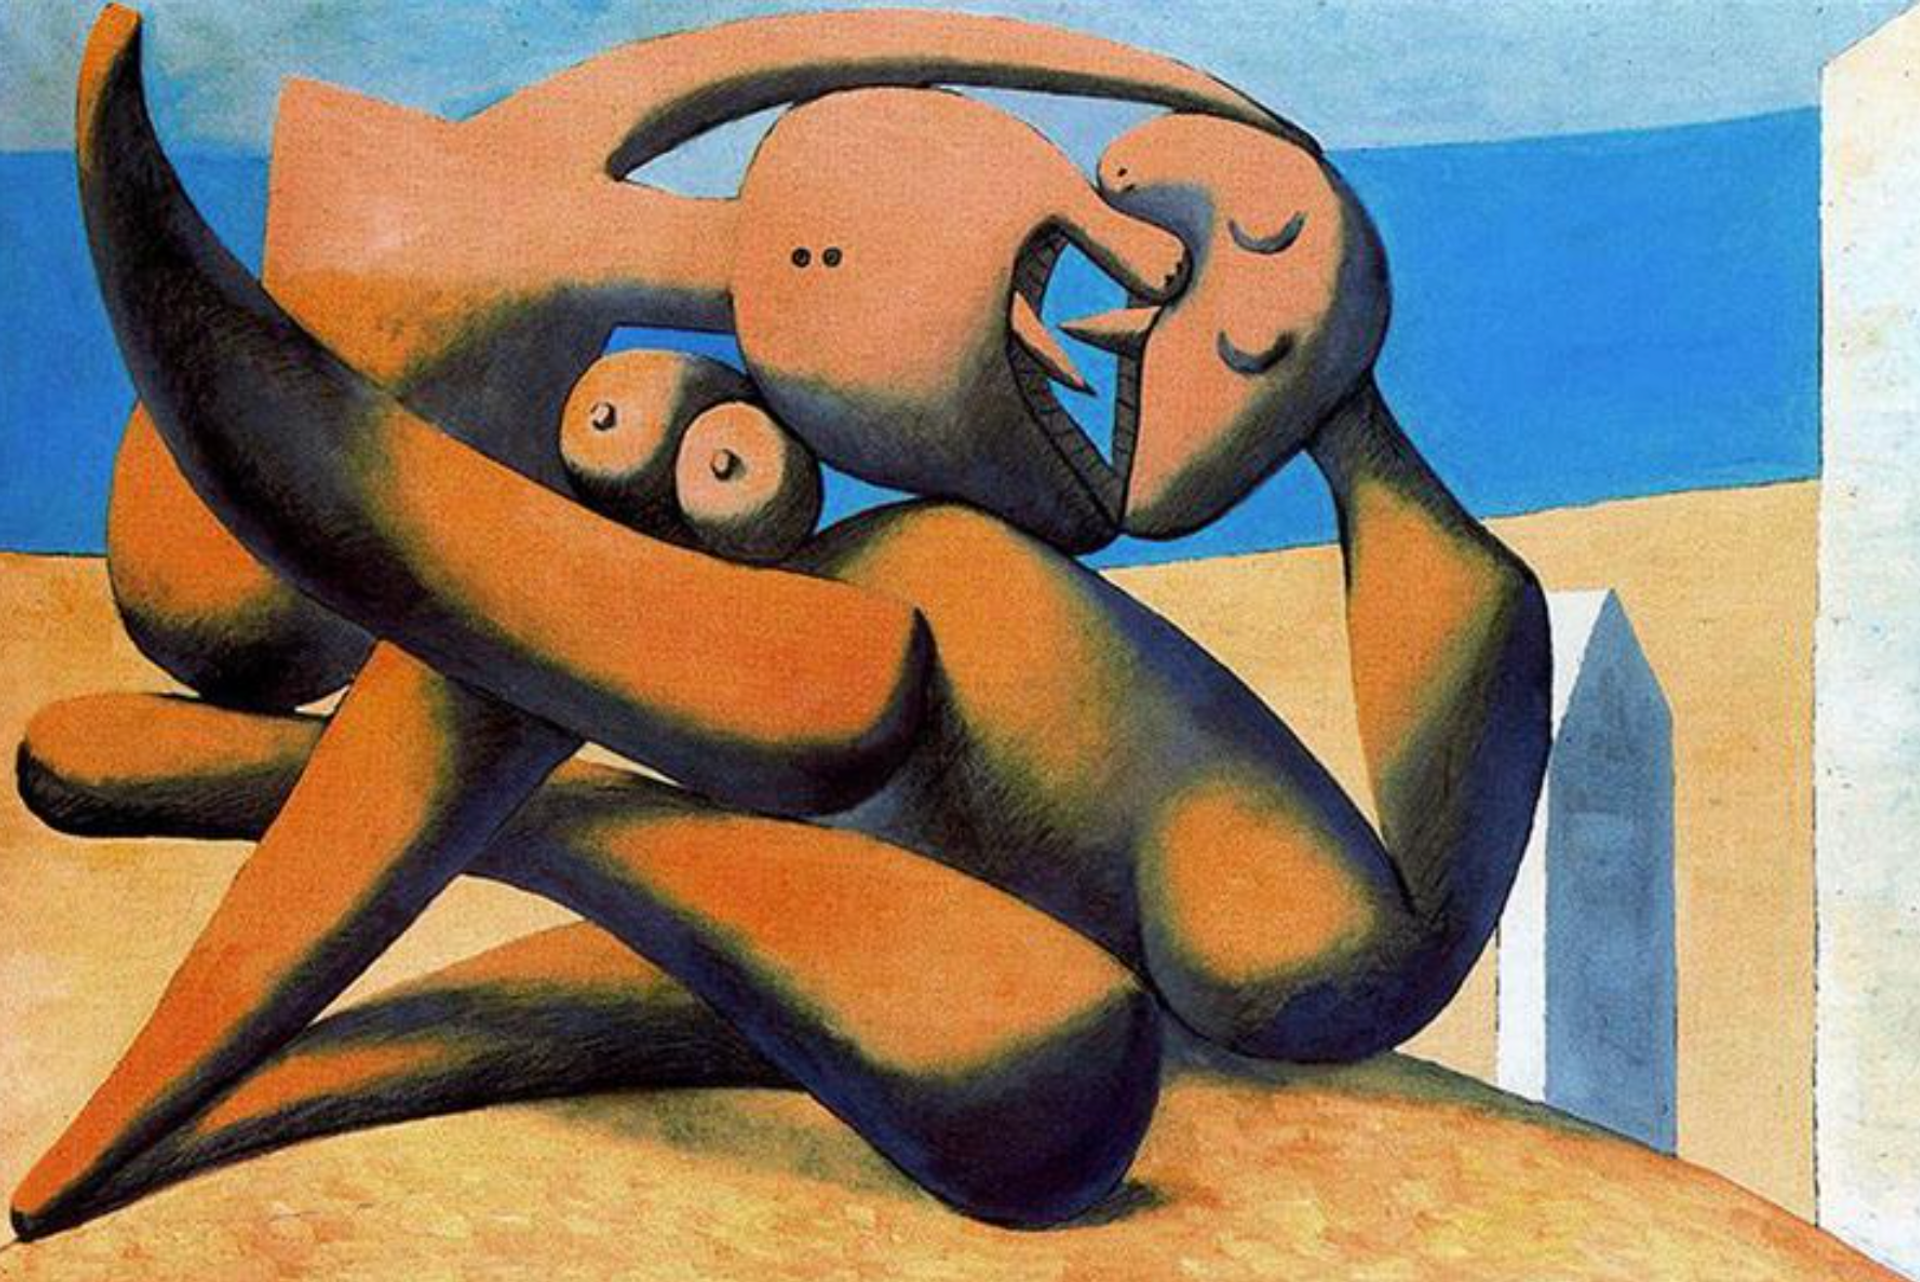 Painting by Picasso depicting two figures kissing. Their form is dissembled and sculptural. They are depicted in warm orange, against a yellow sand and vibrant blue sea. 